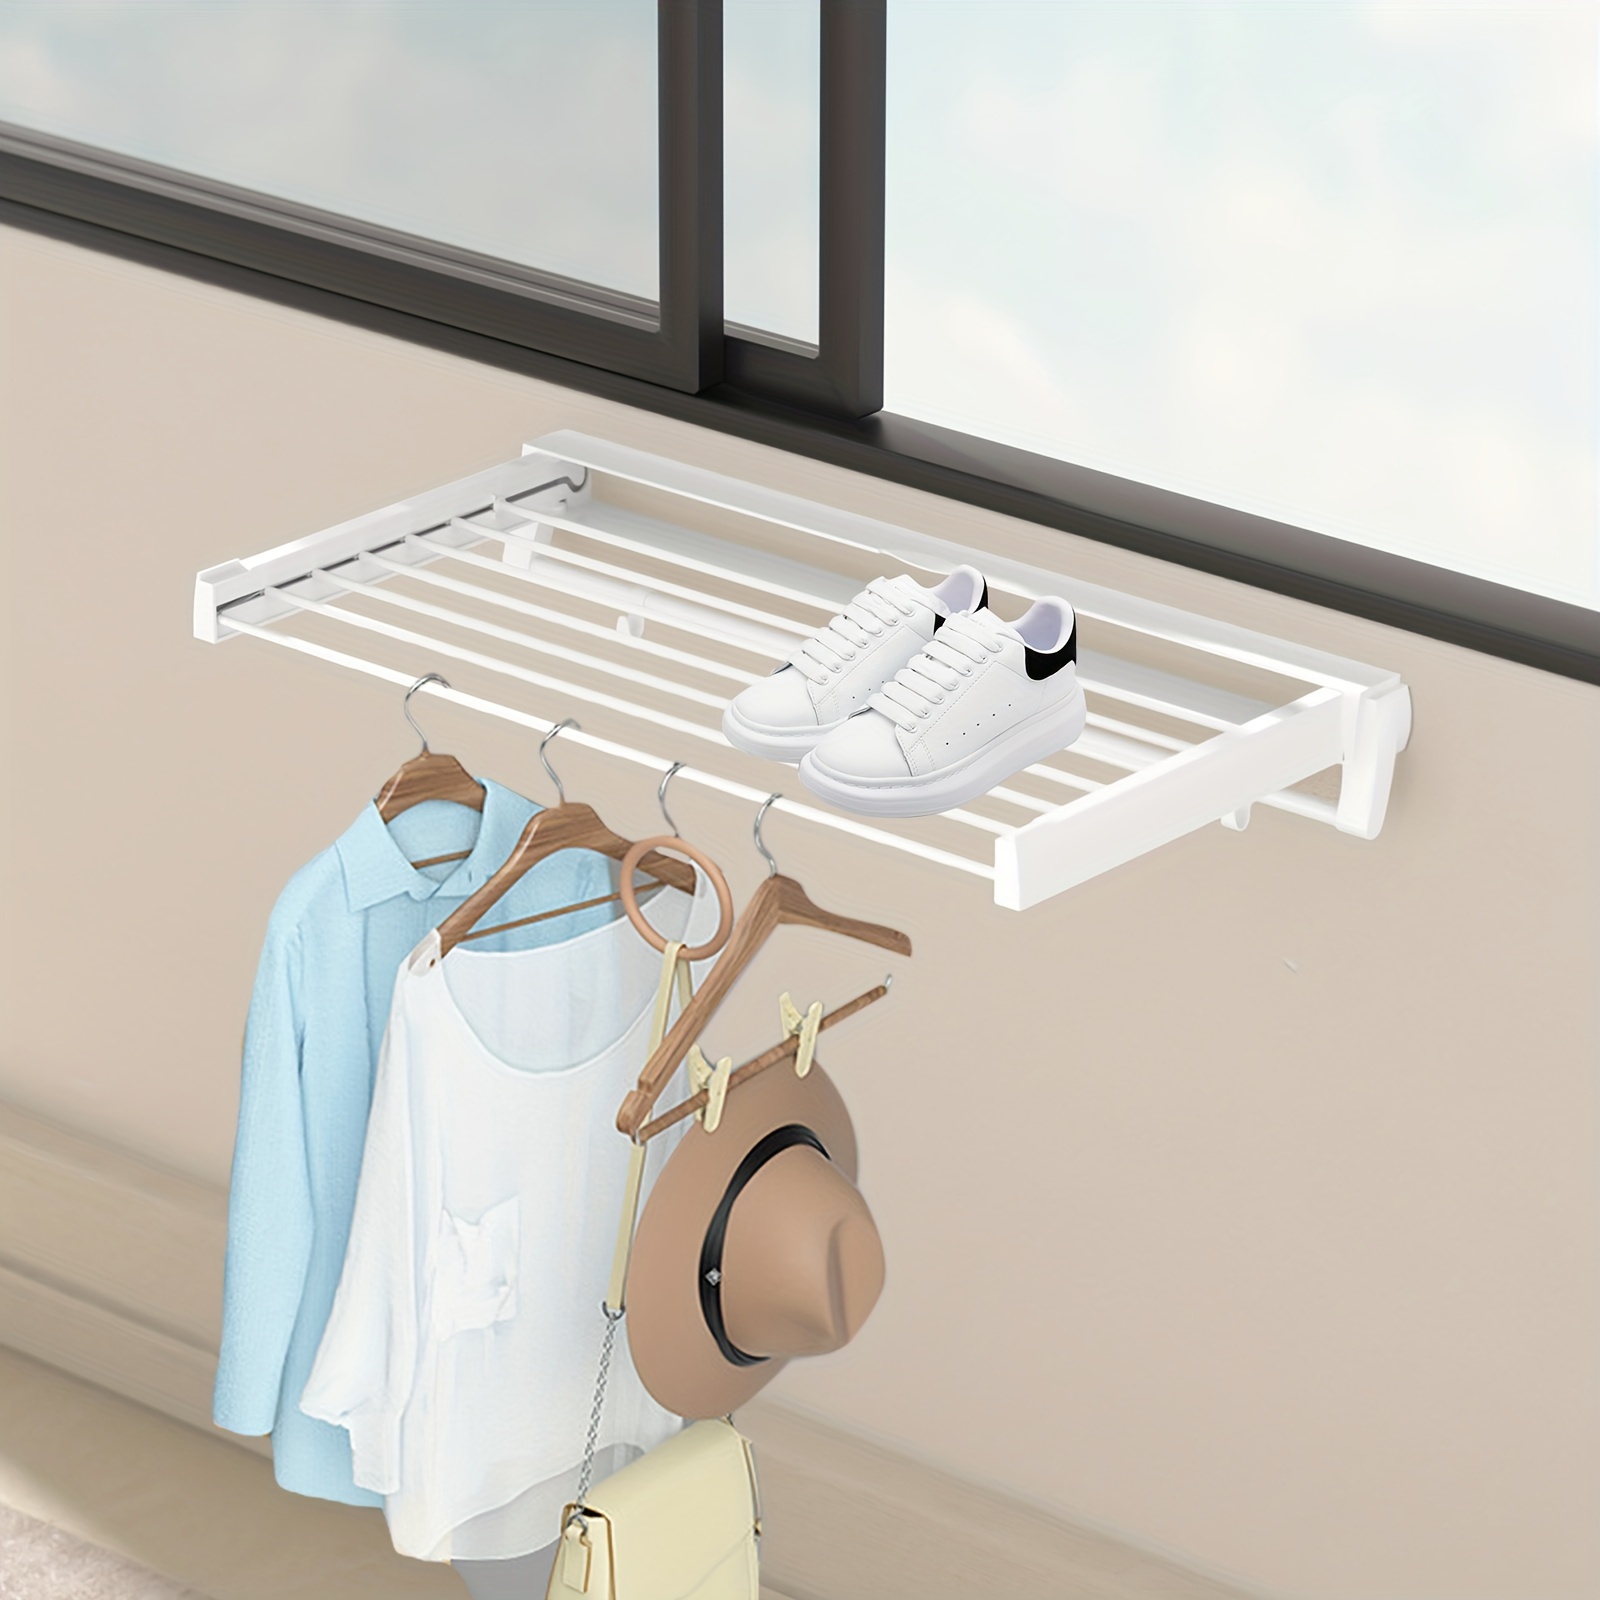 

Wall-mounted Laundry Clothes Storage Drying Rack Retractable Dryer Hanger